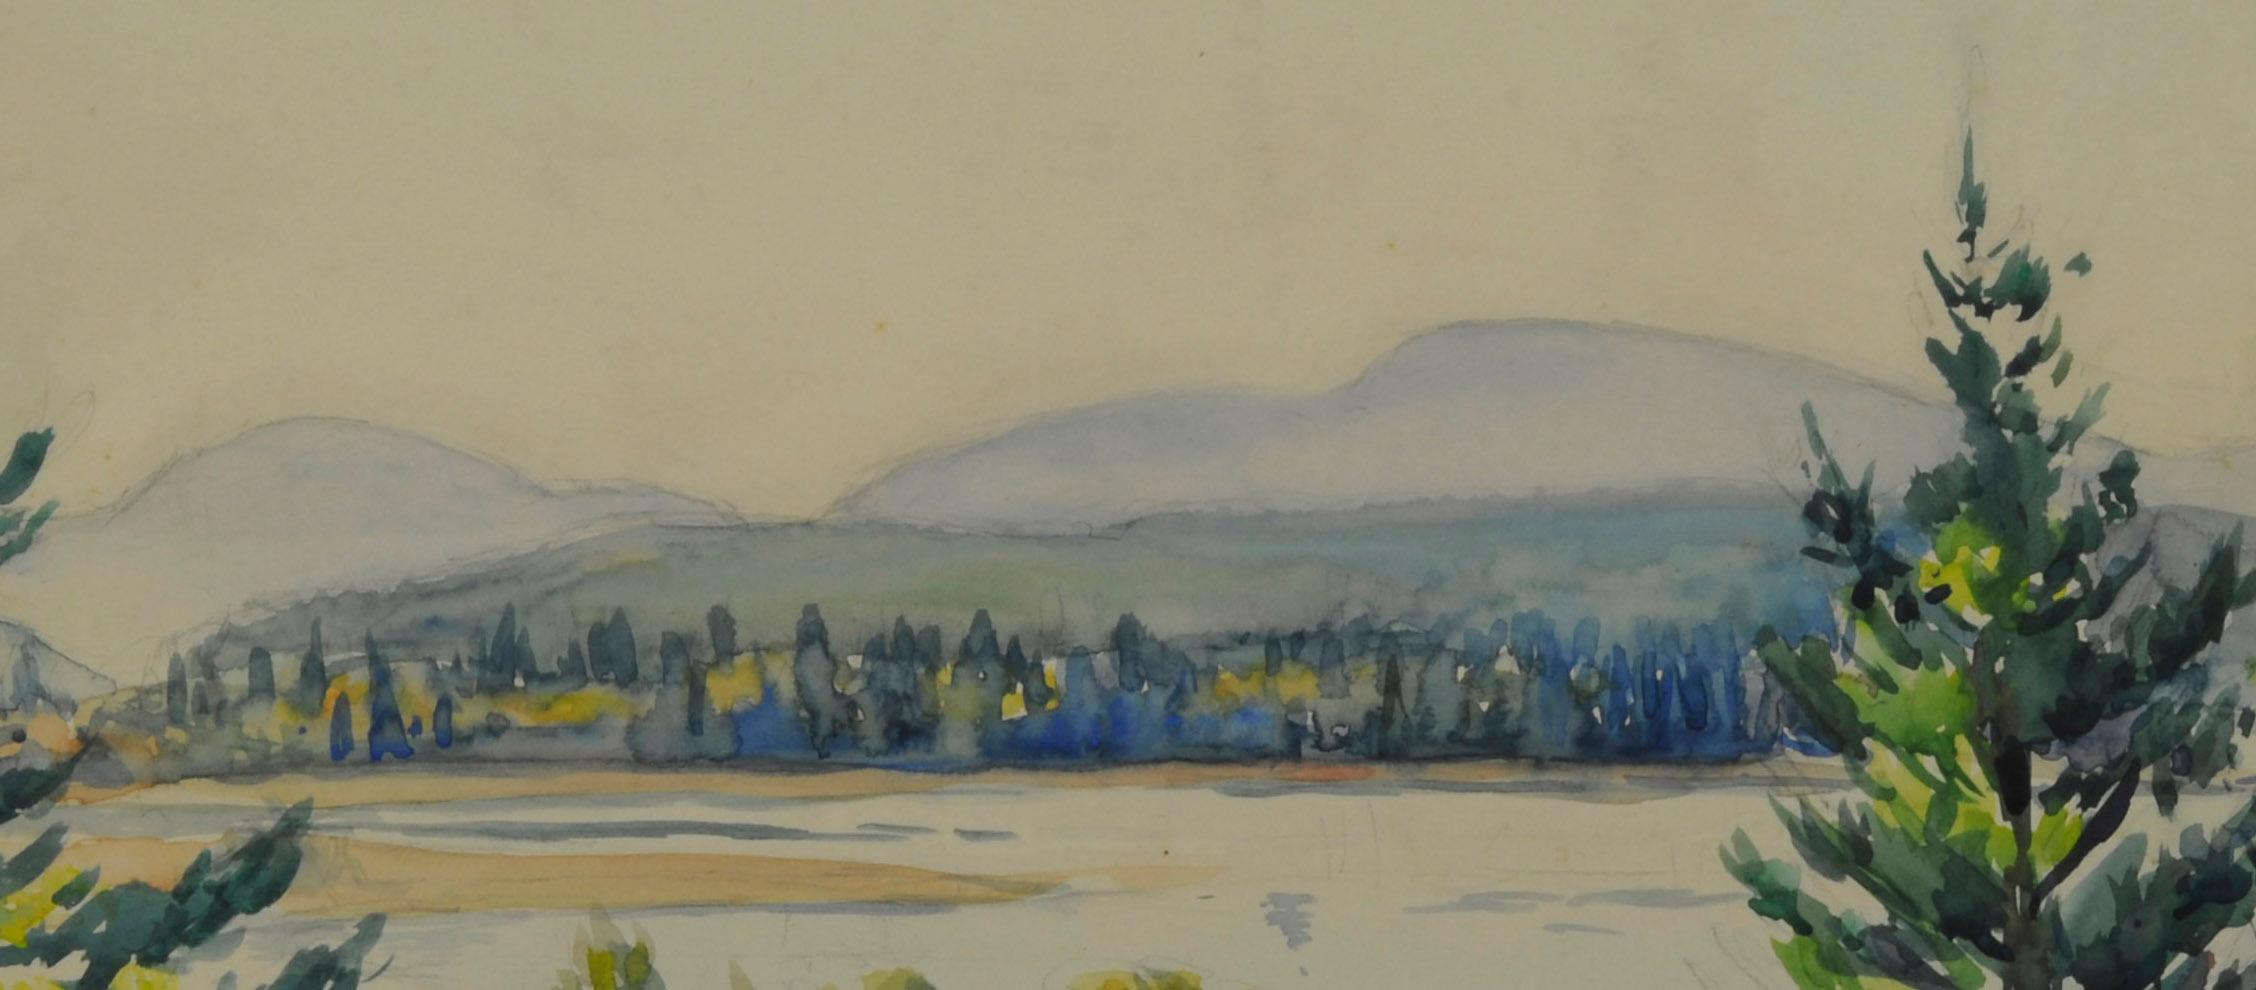 untitled (Maine Autumn Landscape across the narrows from Mt. Desert)
Watercolor, 1945-1955
Signed by the artist lower left in pencil (see photo)
Provenance: Estate of the artist
Condition: Excellent
Image/Sheet size: 14 1/4 x 19 5/8 inches
Regarding